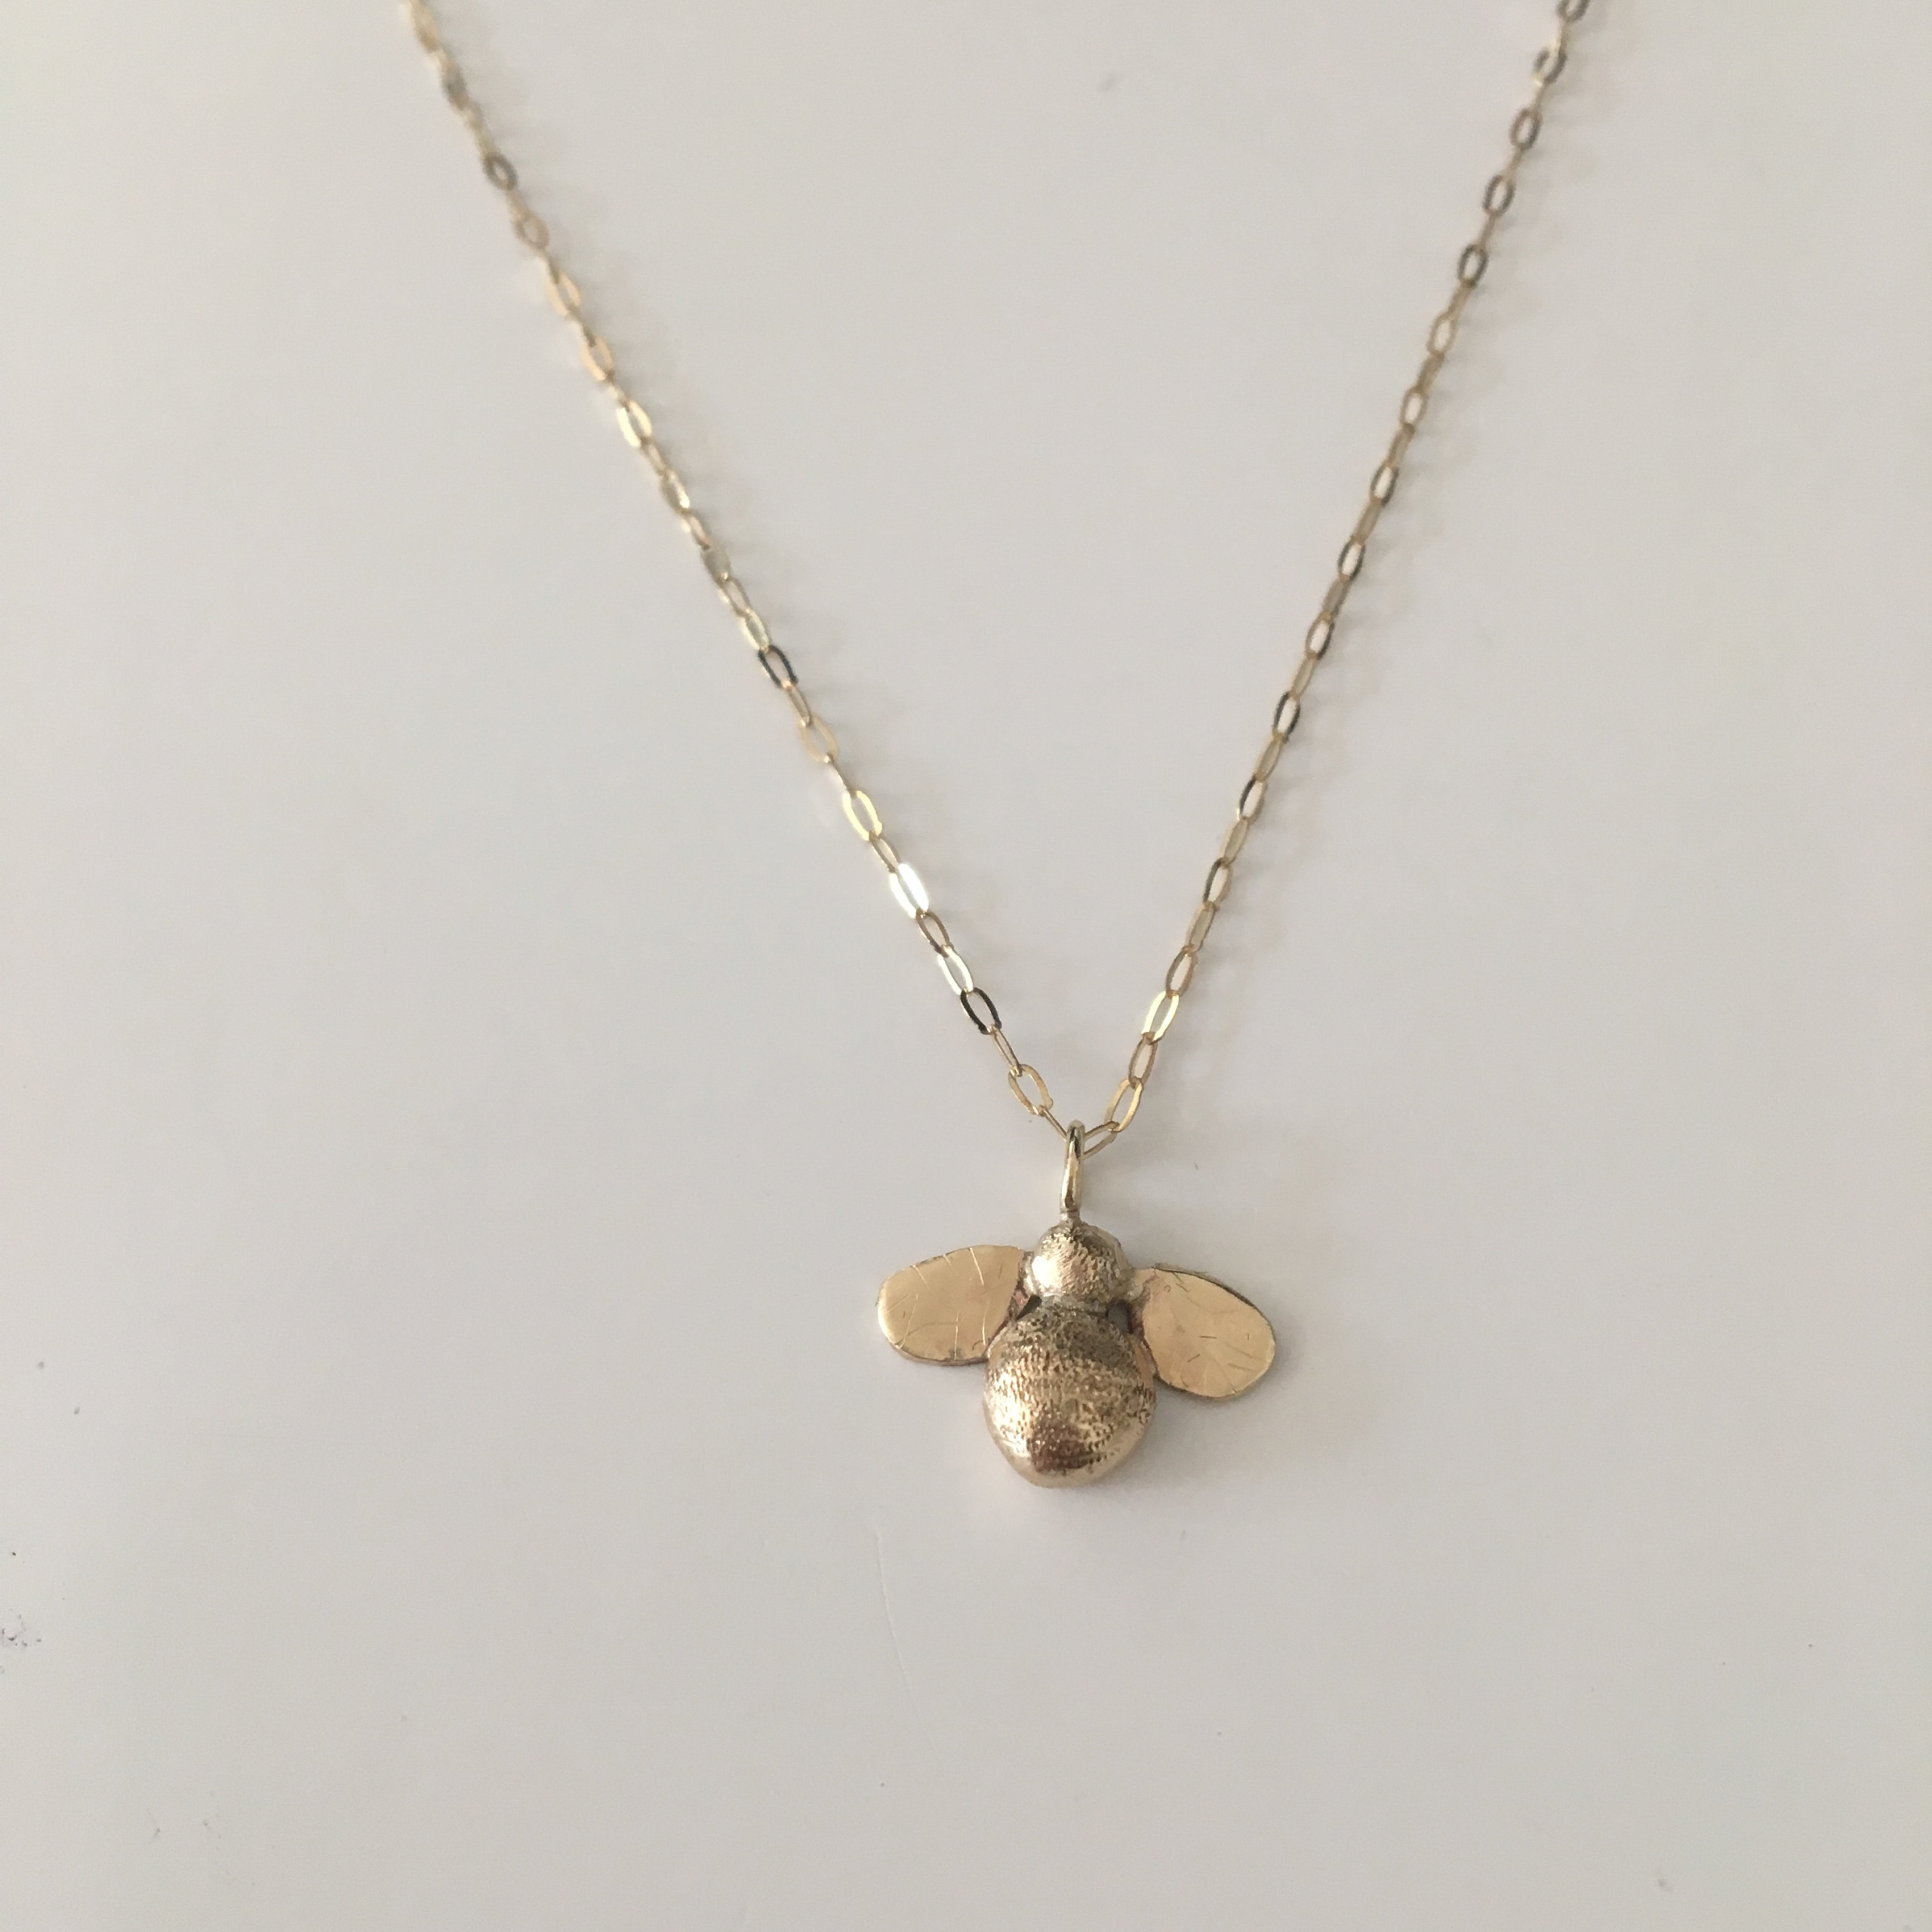 9ct Gold BUMBLEBEE BEE PENDANT NECKLACE